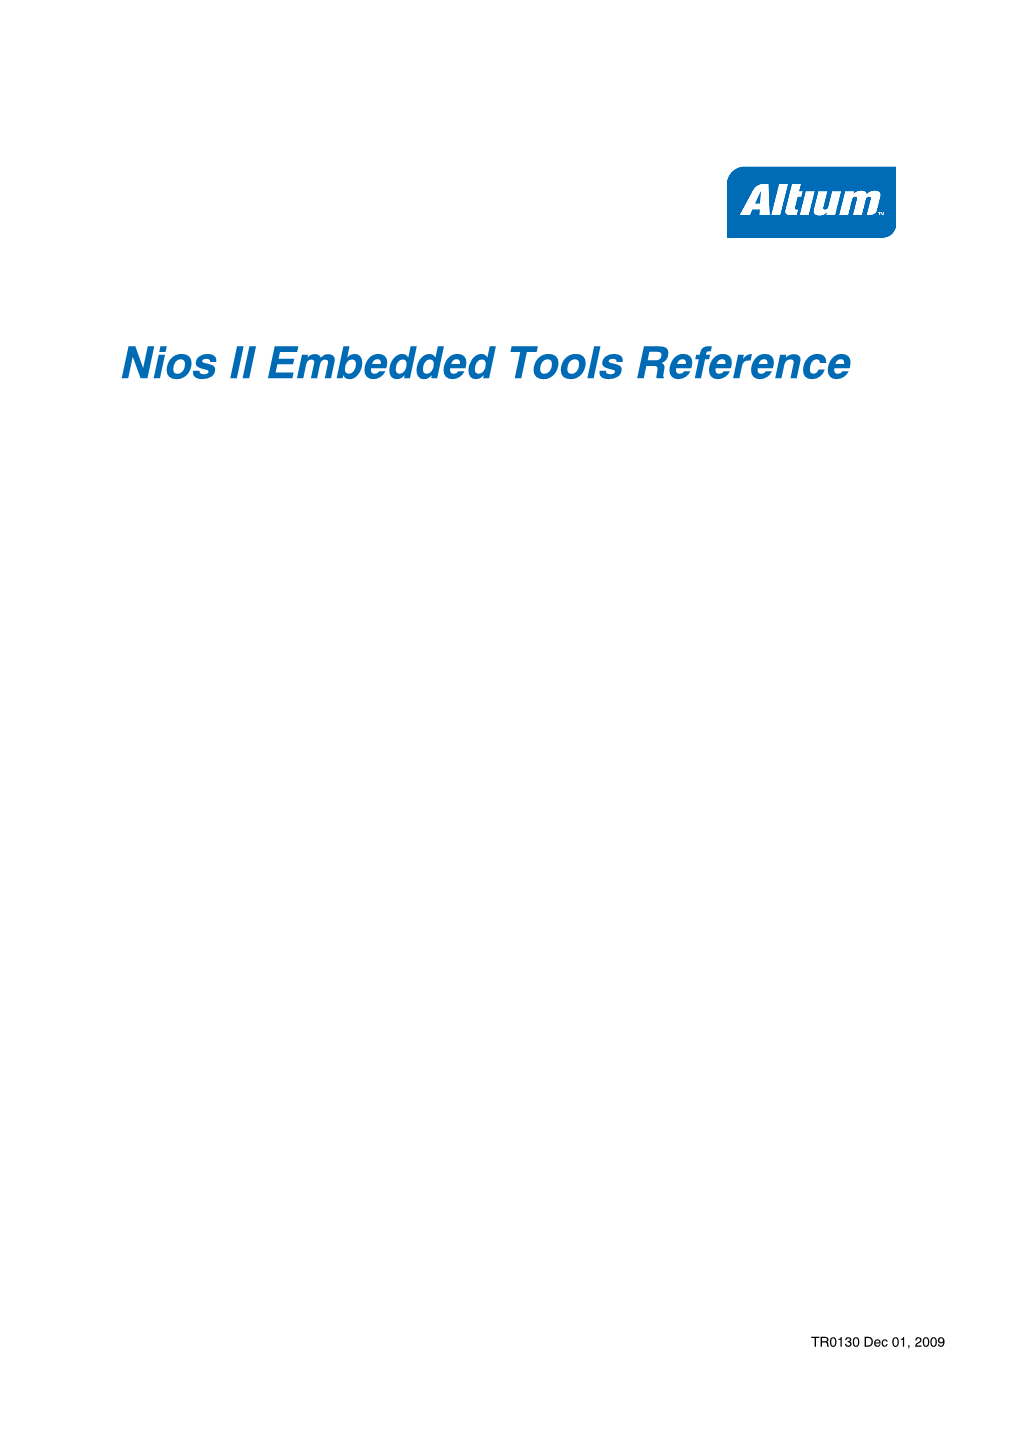 TR0130 Nios II Embedded Tools Reference